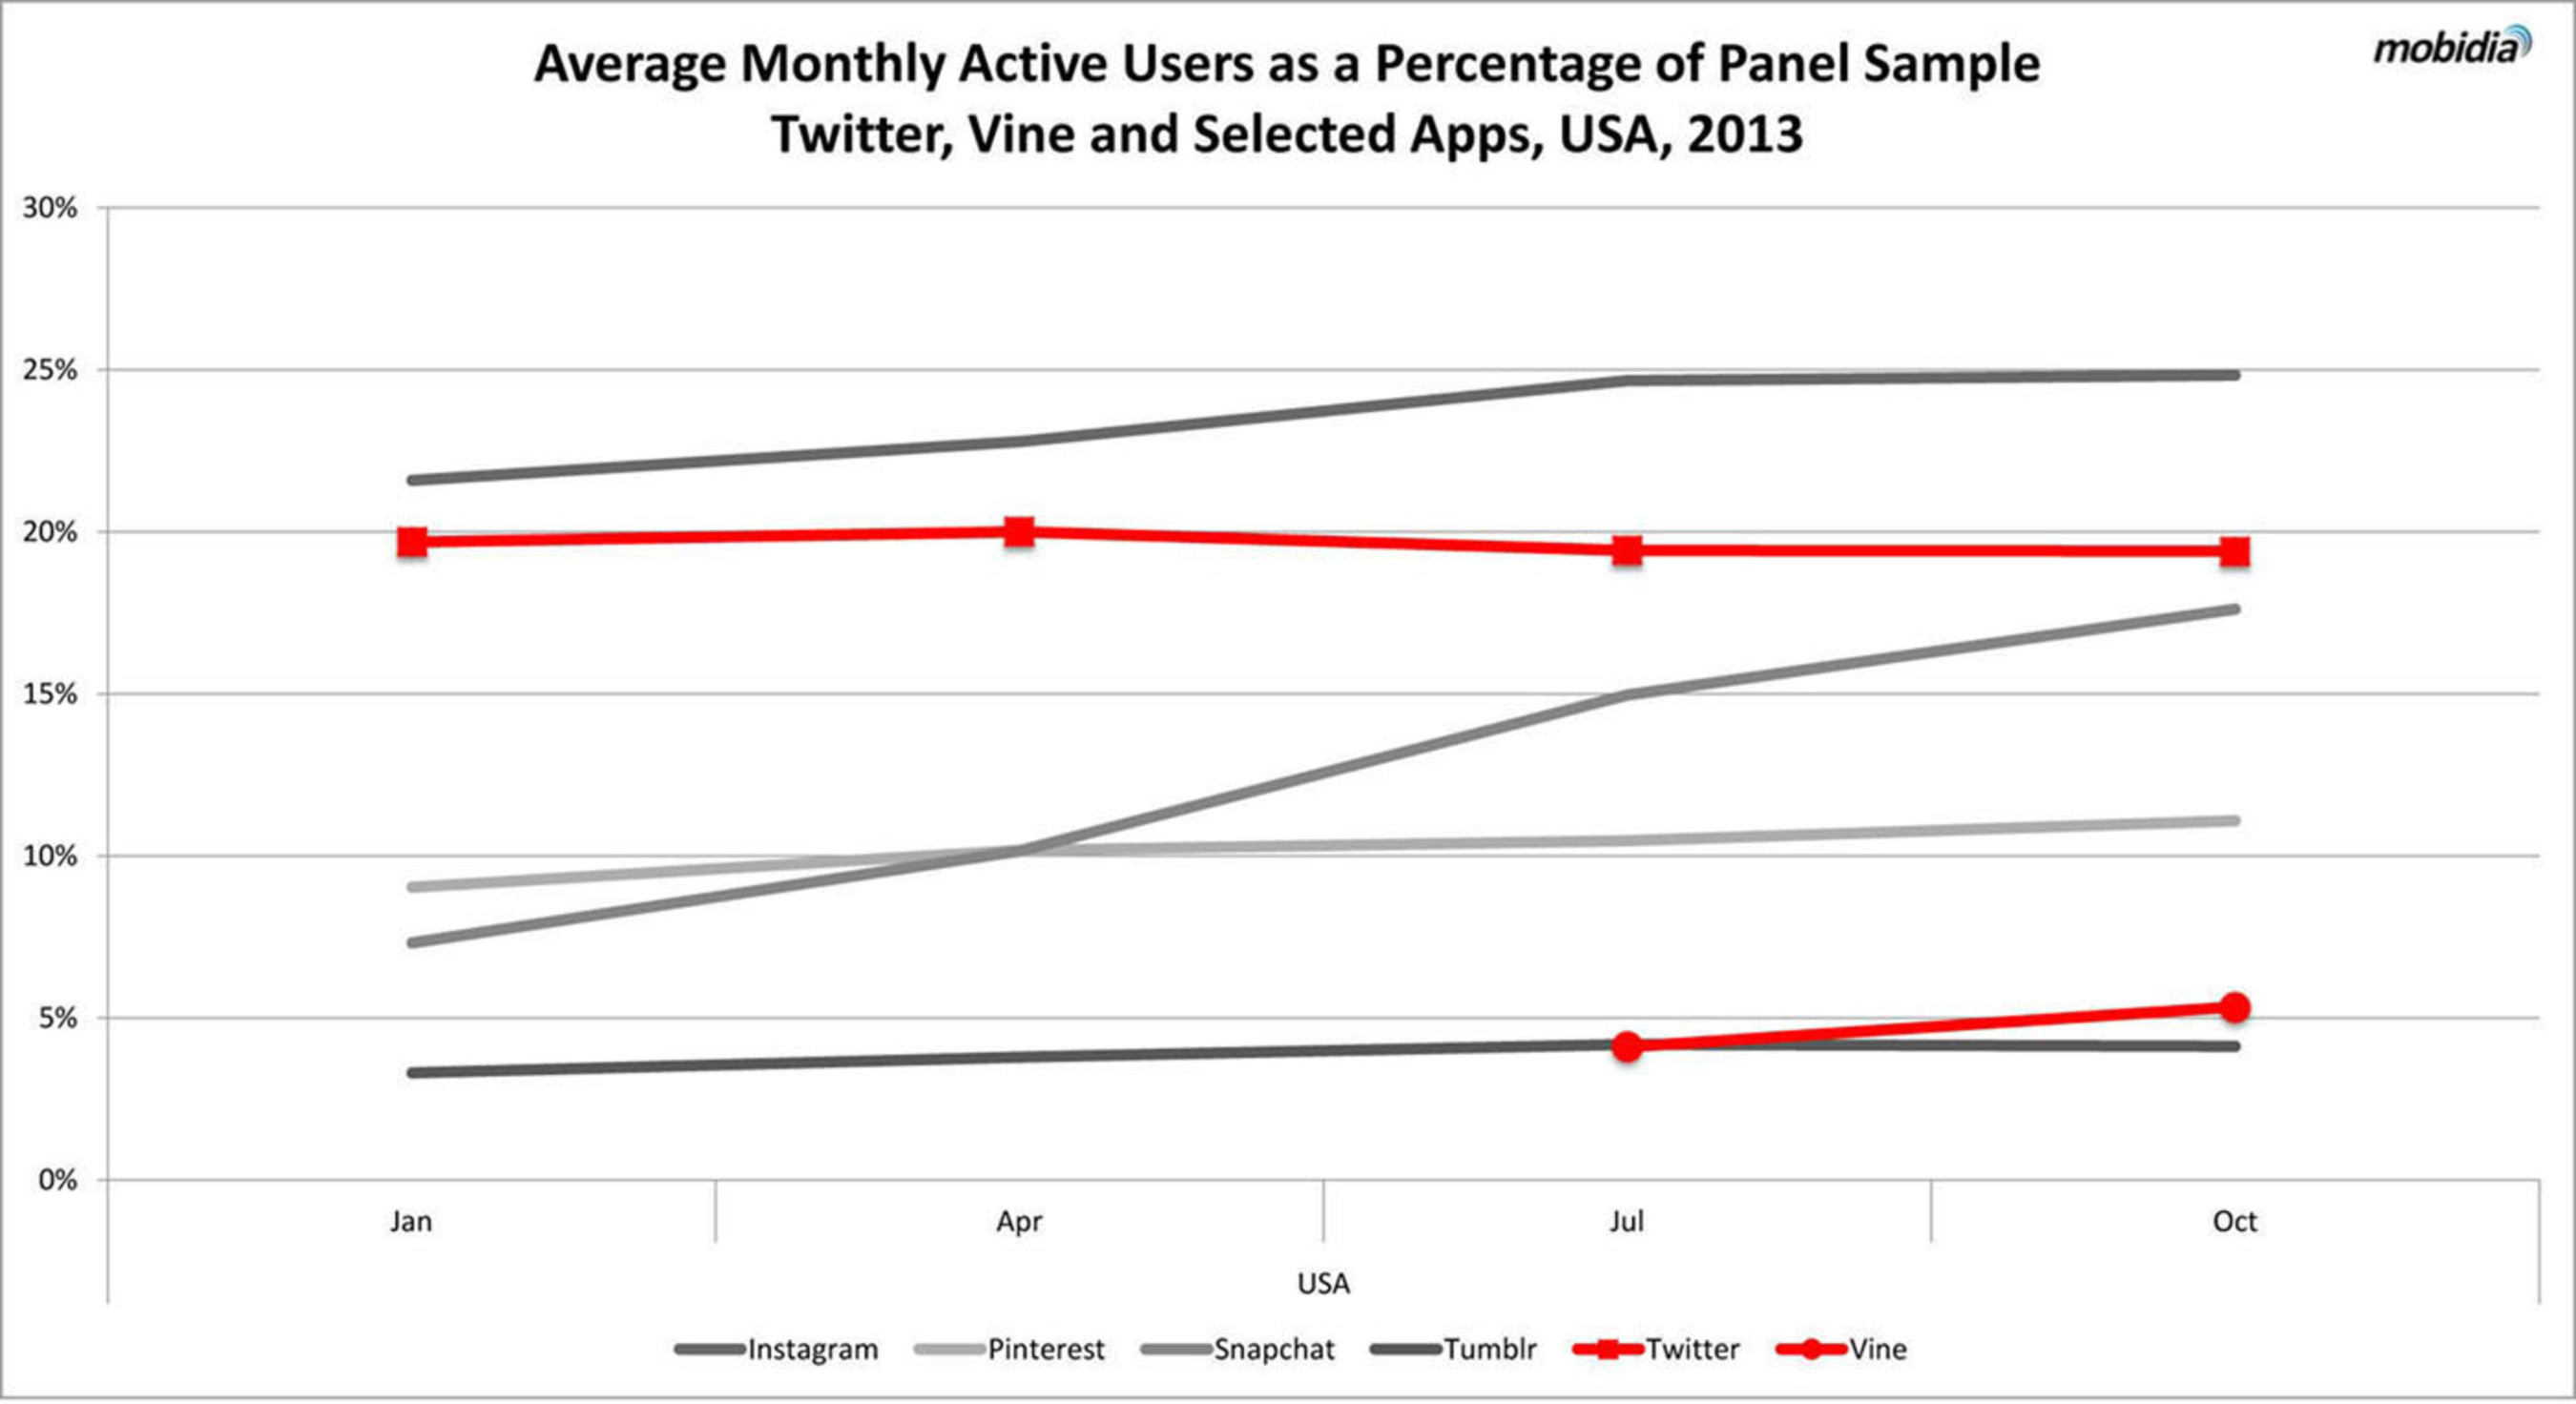 "Average Monthly Active Users as a Percentage of Panel Sample Twitter, Vine and Selected Apps, USA, 2013". (PRNewsFoto/Mobidia Technology, Inc.) (PRNewsFoto/MOBIDIA TECHNOLOGY, INC.)